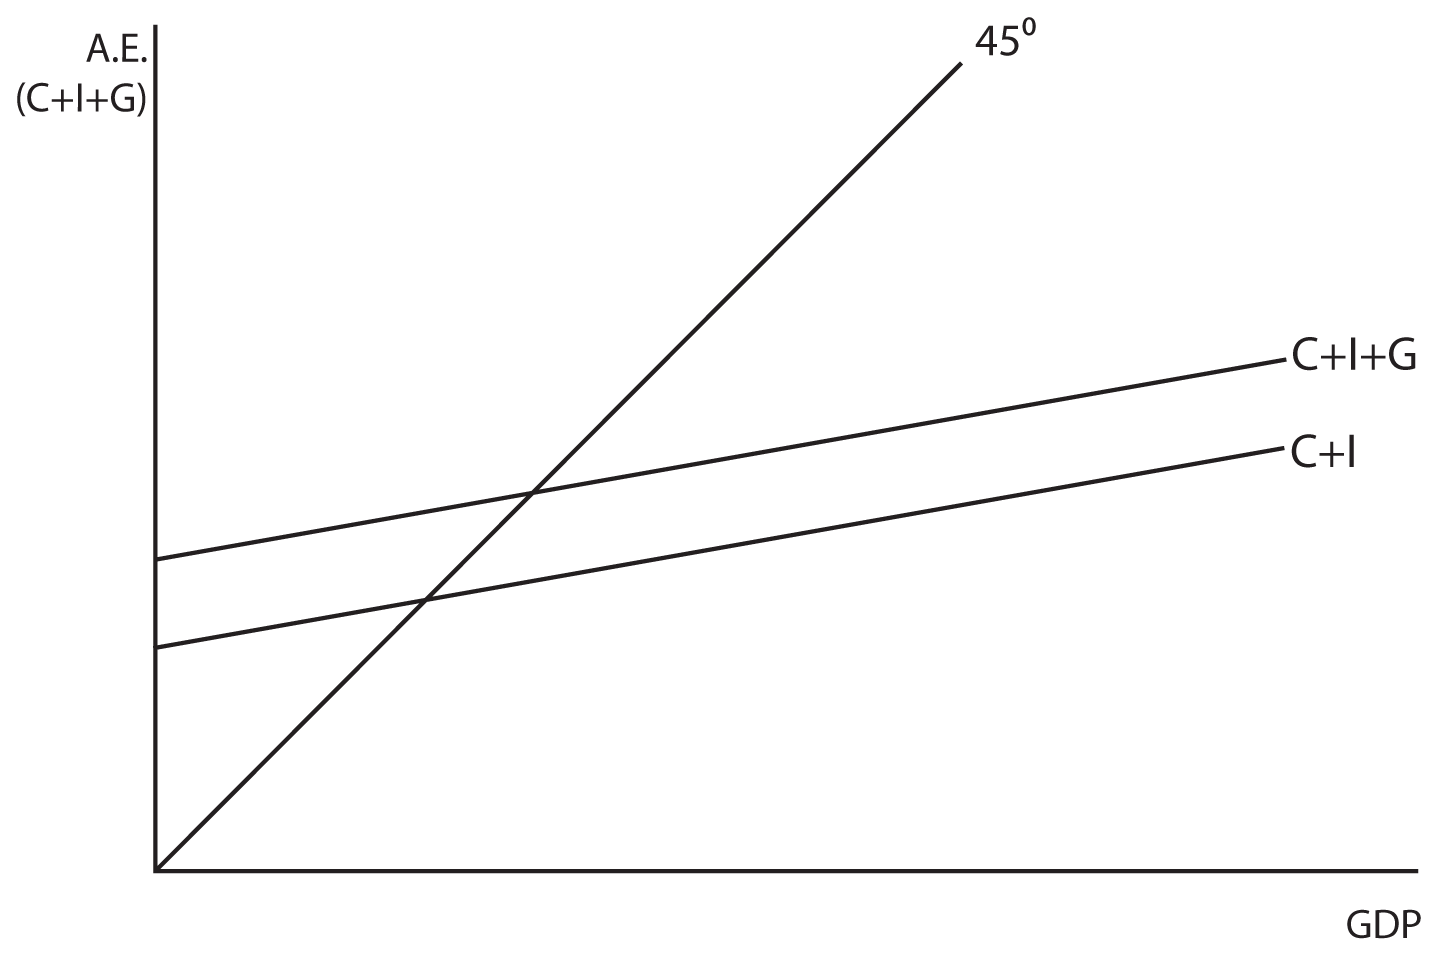 Image 7.09: The image shows a graph. The y axis is labeled A.E. (C + I + G). The x axis is labeled GDP. There is a 45 degree line drawn from the origin. There are two lines are drawn from the y axis, The first has a slope of C + I. The second is higher on the y axis and has a slope of C + I + G.